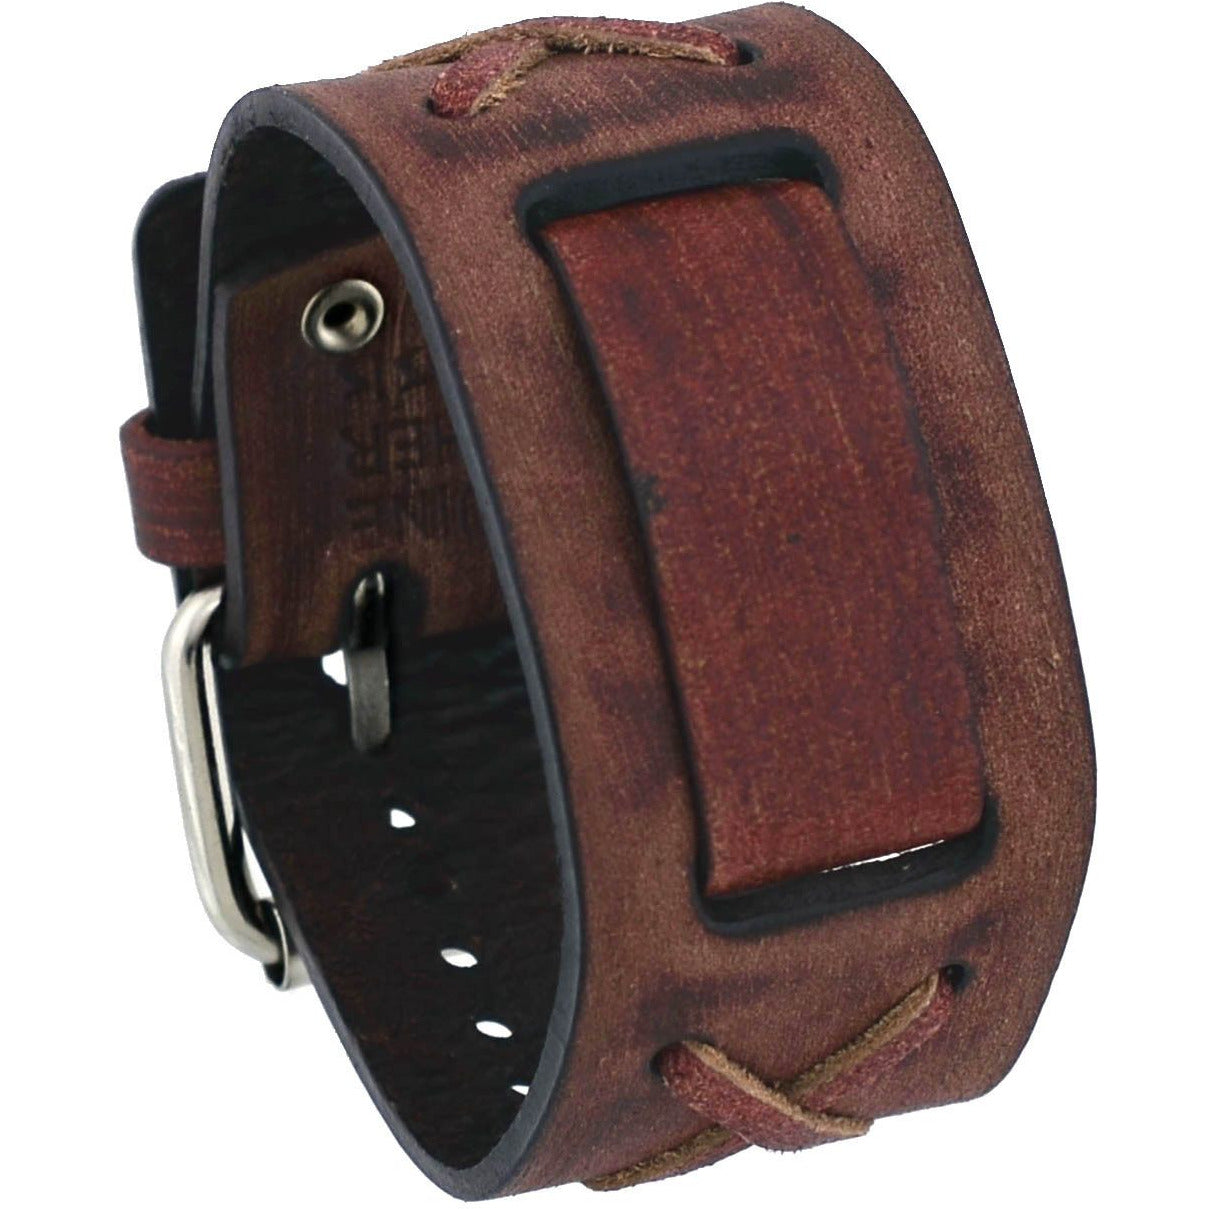 Ash Natural Dark Wood Watch with Distressed Brown Leather Cuff